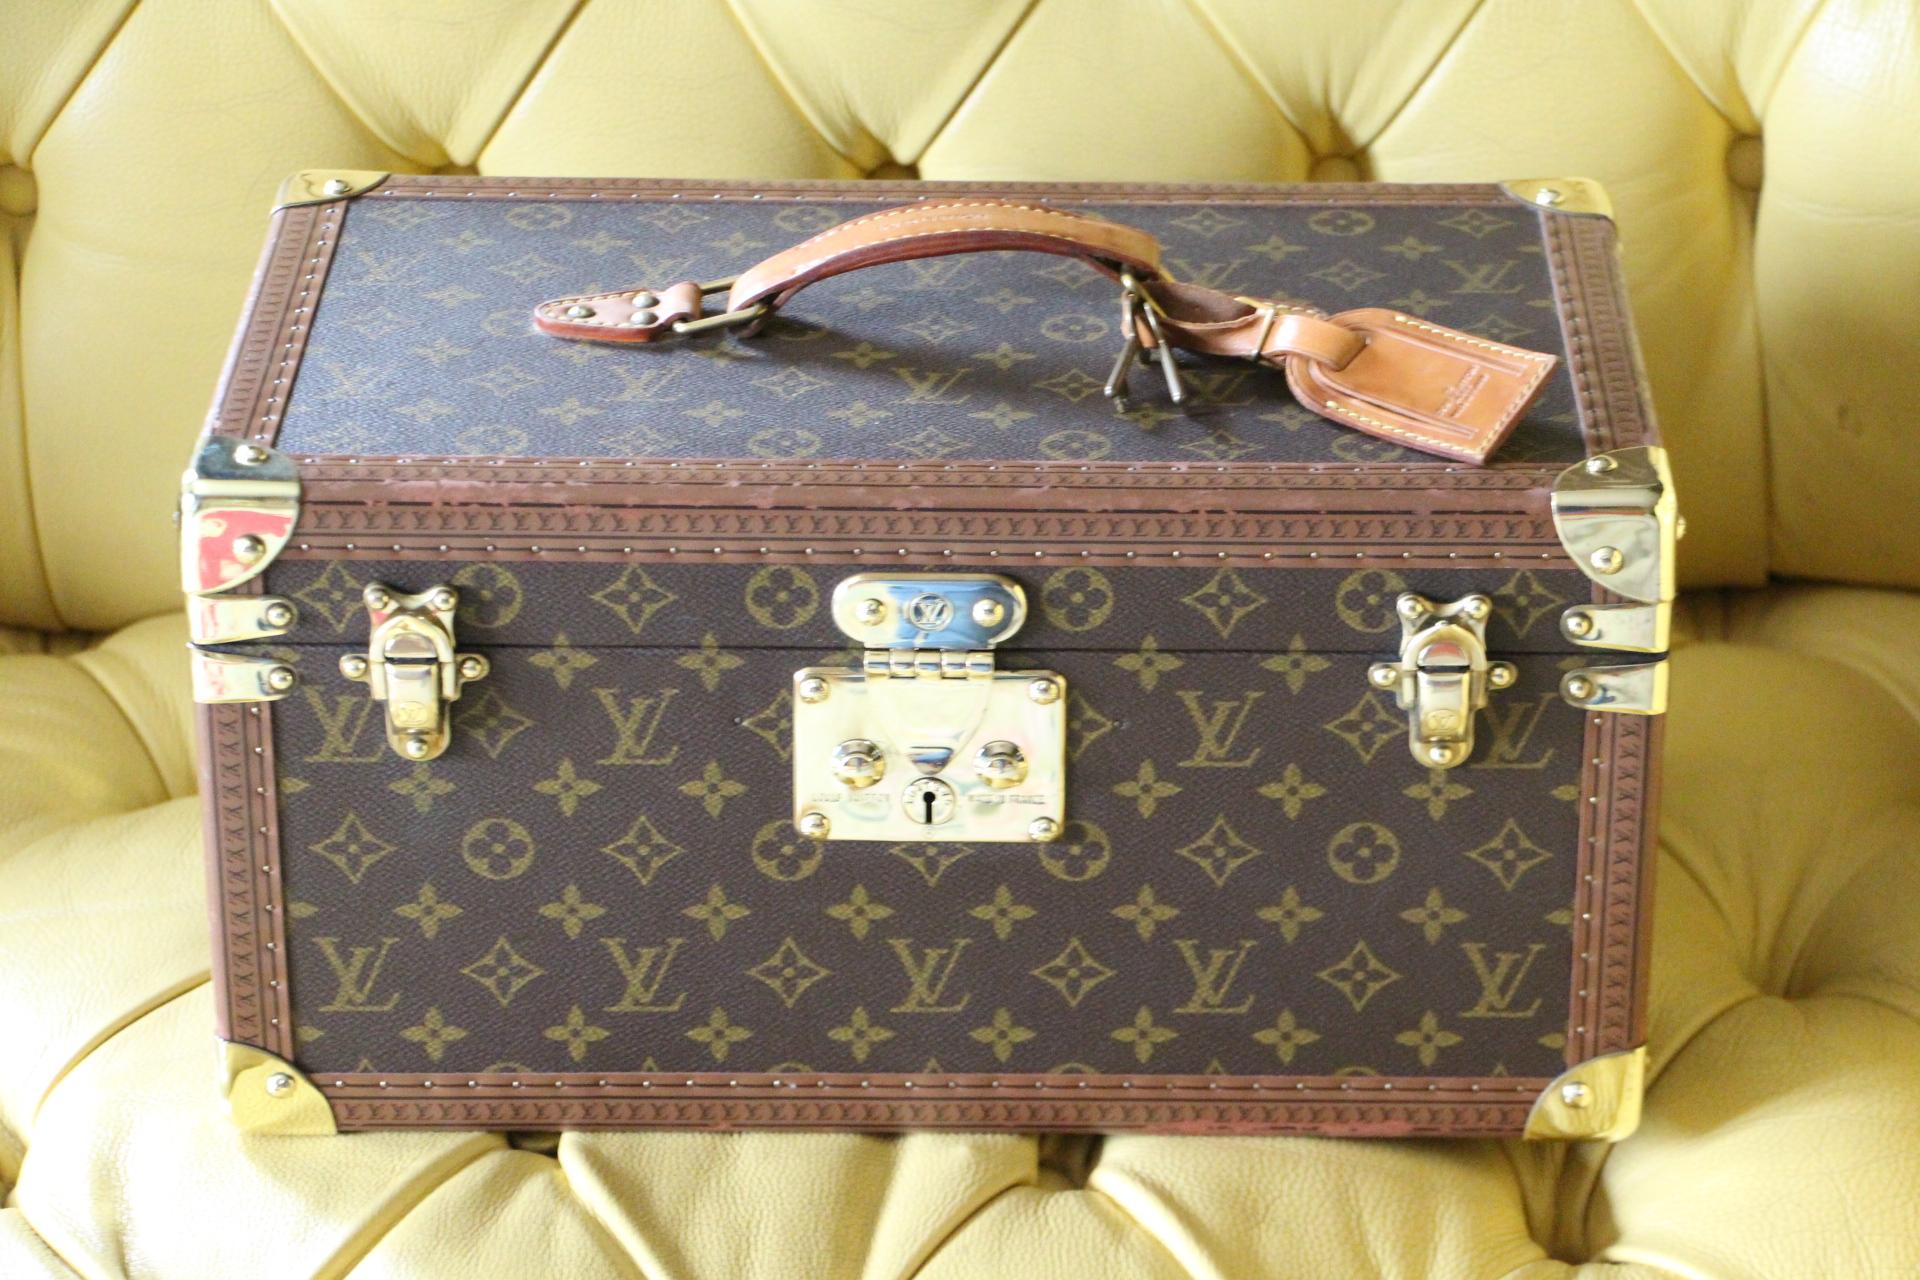 This beauty case features monogram canvas and all brass fittings. All studs are marked as well as its leather handle.
Interior: beige coated canvas, adjustable leather straps for holding materials. Under its lid there is a mirror. Removable little